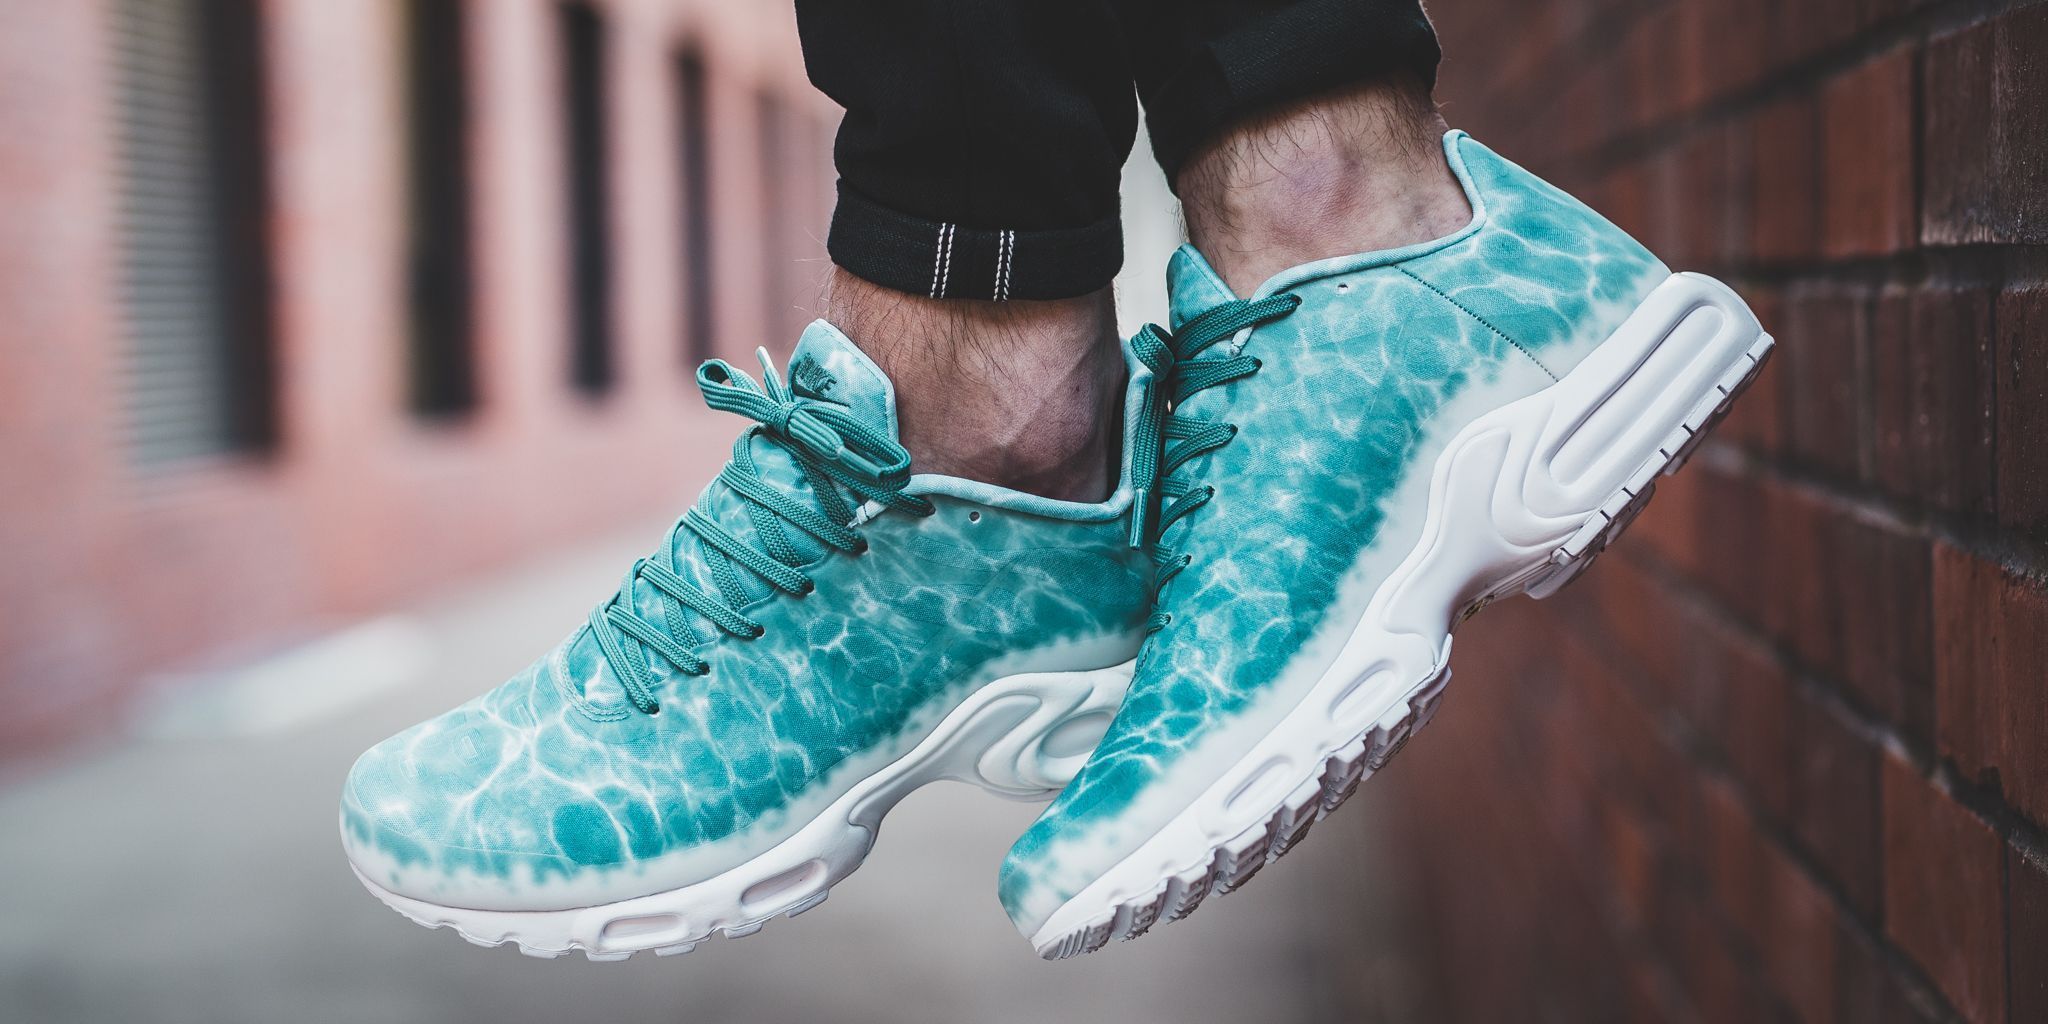 Titolo on Twitter: "ONLINE NOW! Nike Air Max Plus GPX Premium SP - Mineral  Teal/Mineral Teal-White SHOP HERE: https://t.co/CZRMnQMusZ #requin  #swimmingpool https://t.co/VMoCZLcP3g" / Twitter